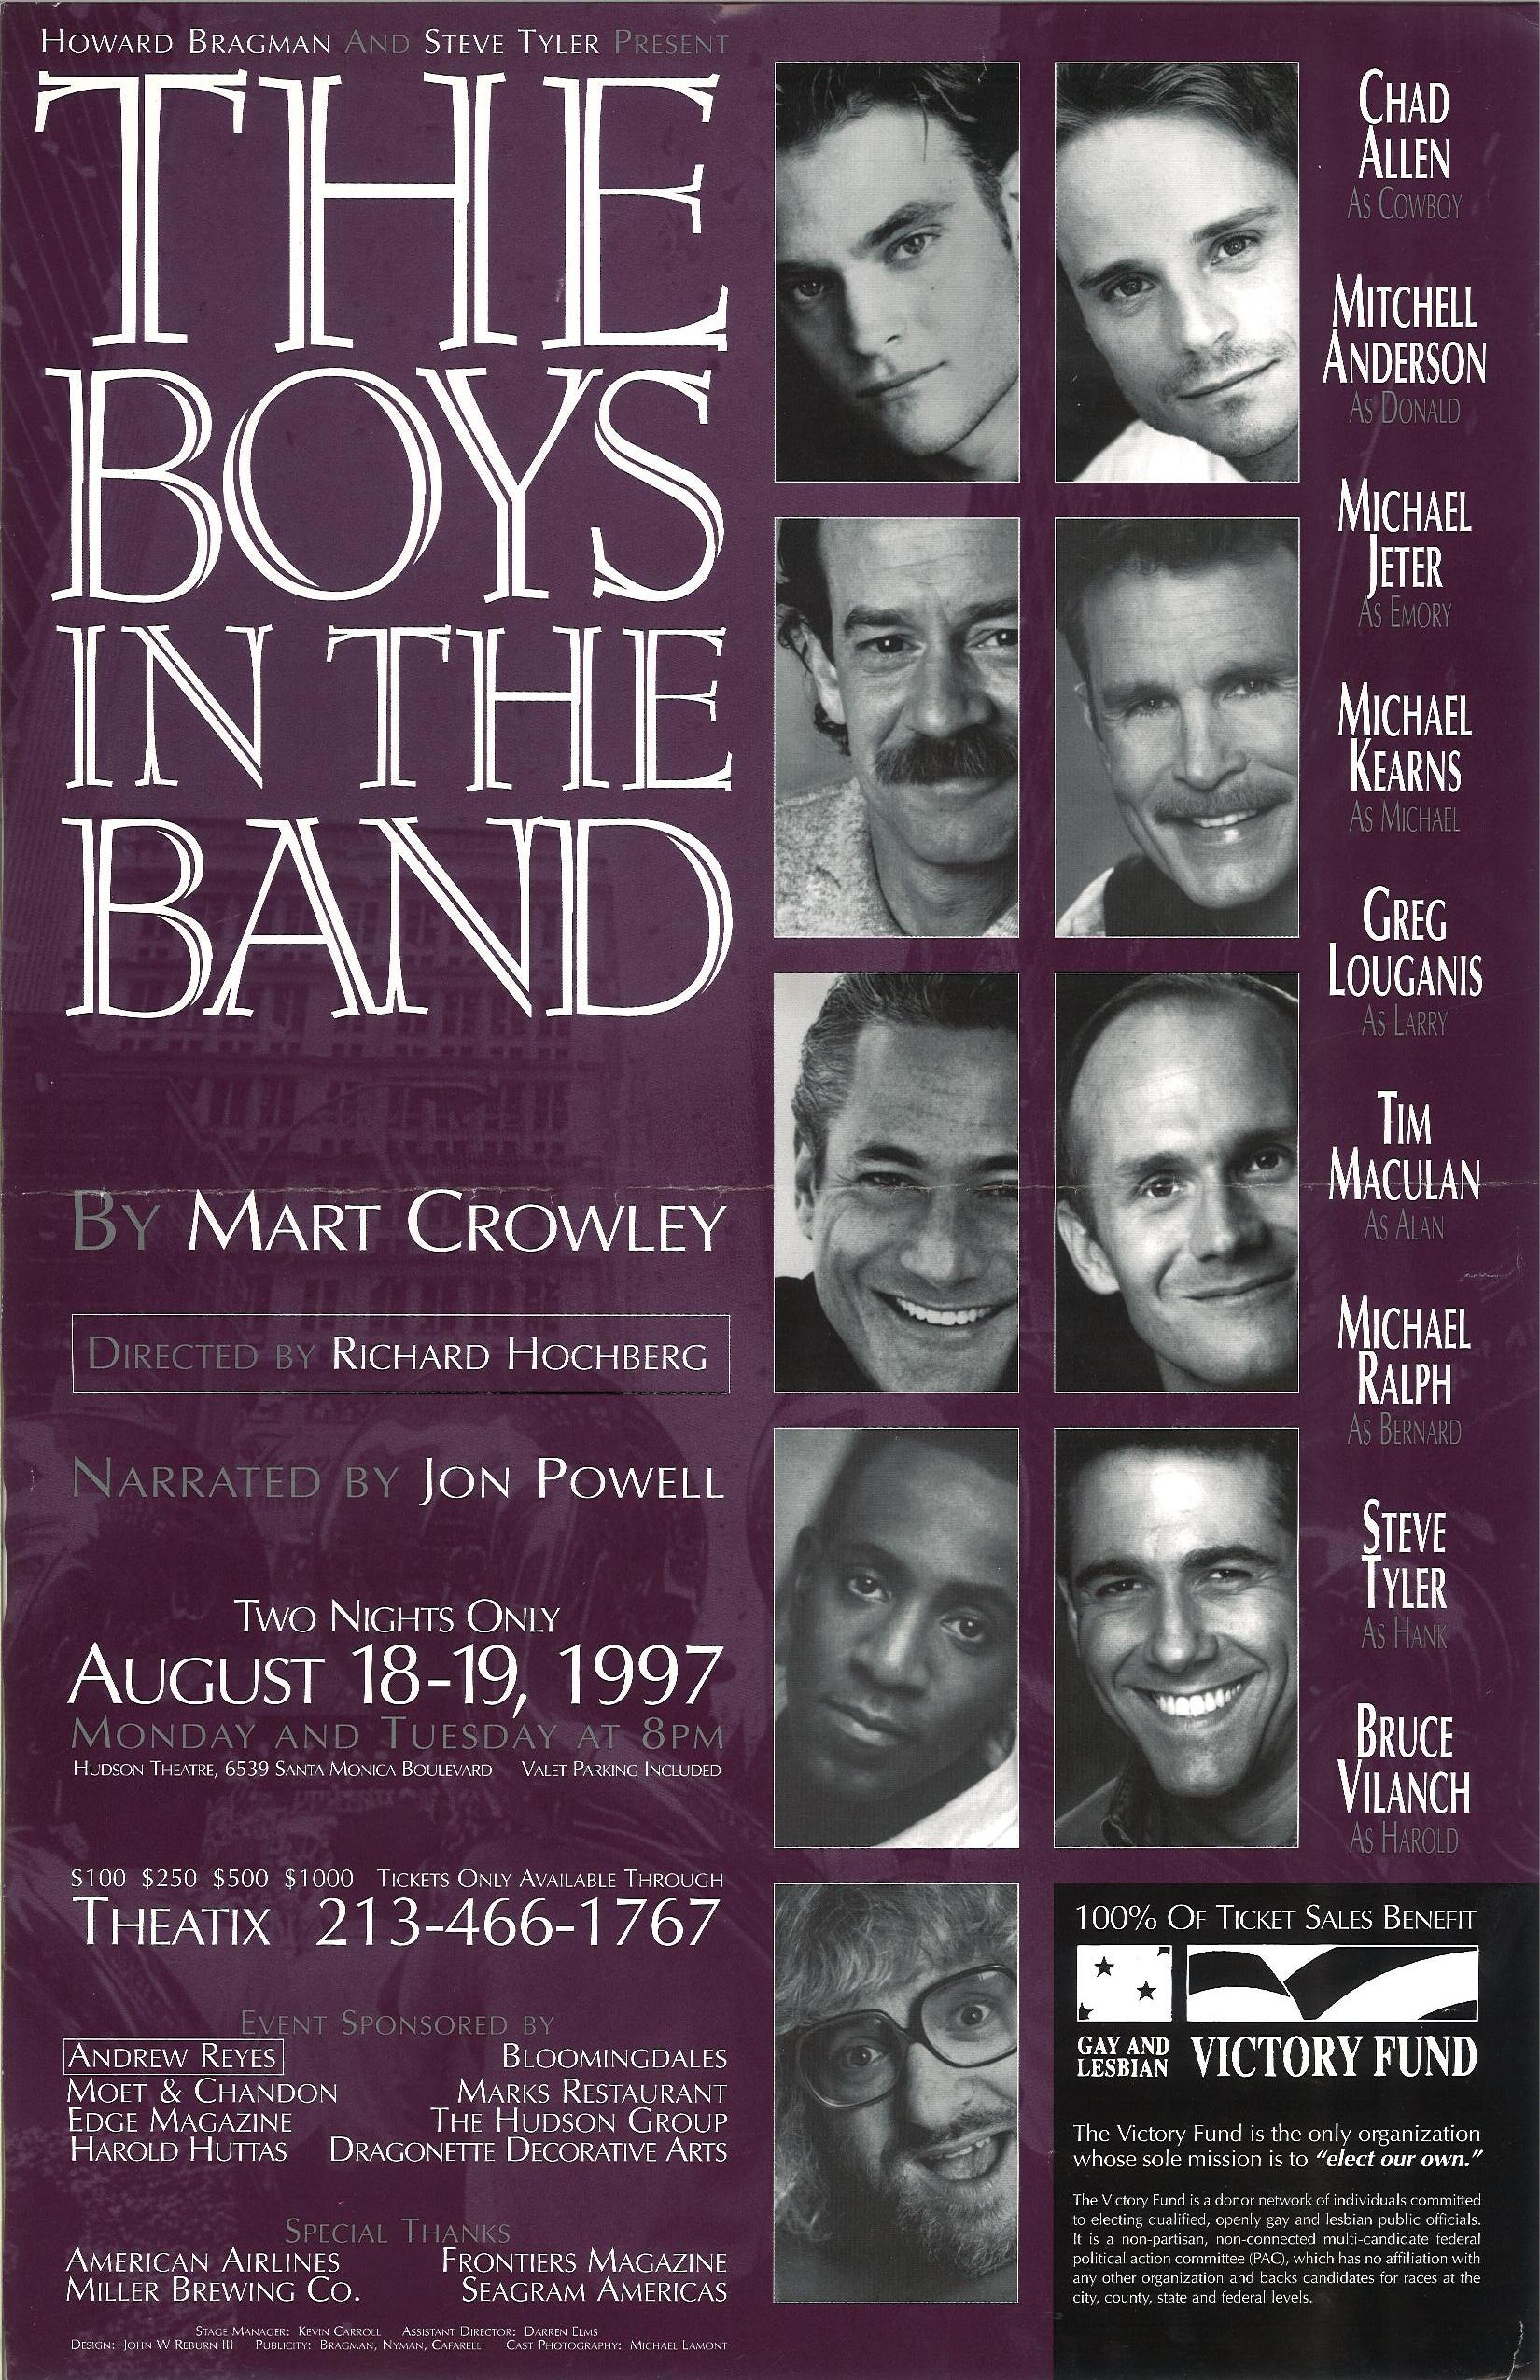 THE BOYS IN THE BAND- Chad Allen, Mitchell Anderson, Michael Jeter, Michael Kearns, Greg Louganis, Steve Tyler, Bruce Vilanch, Michael Ralph, Directed By Richard Hochberg